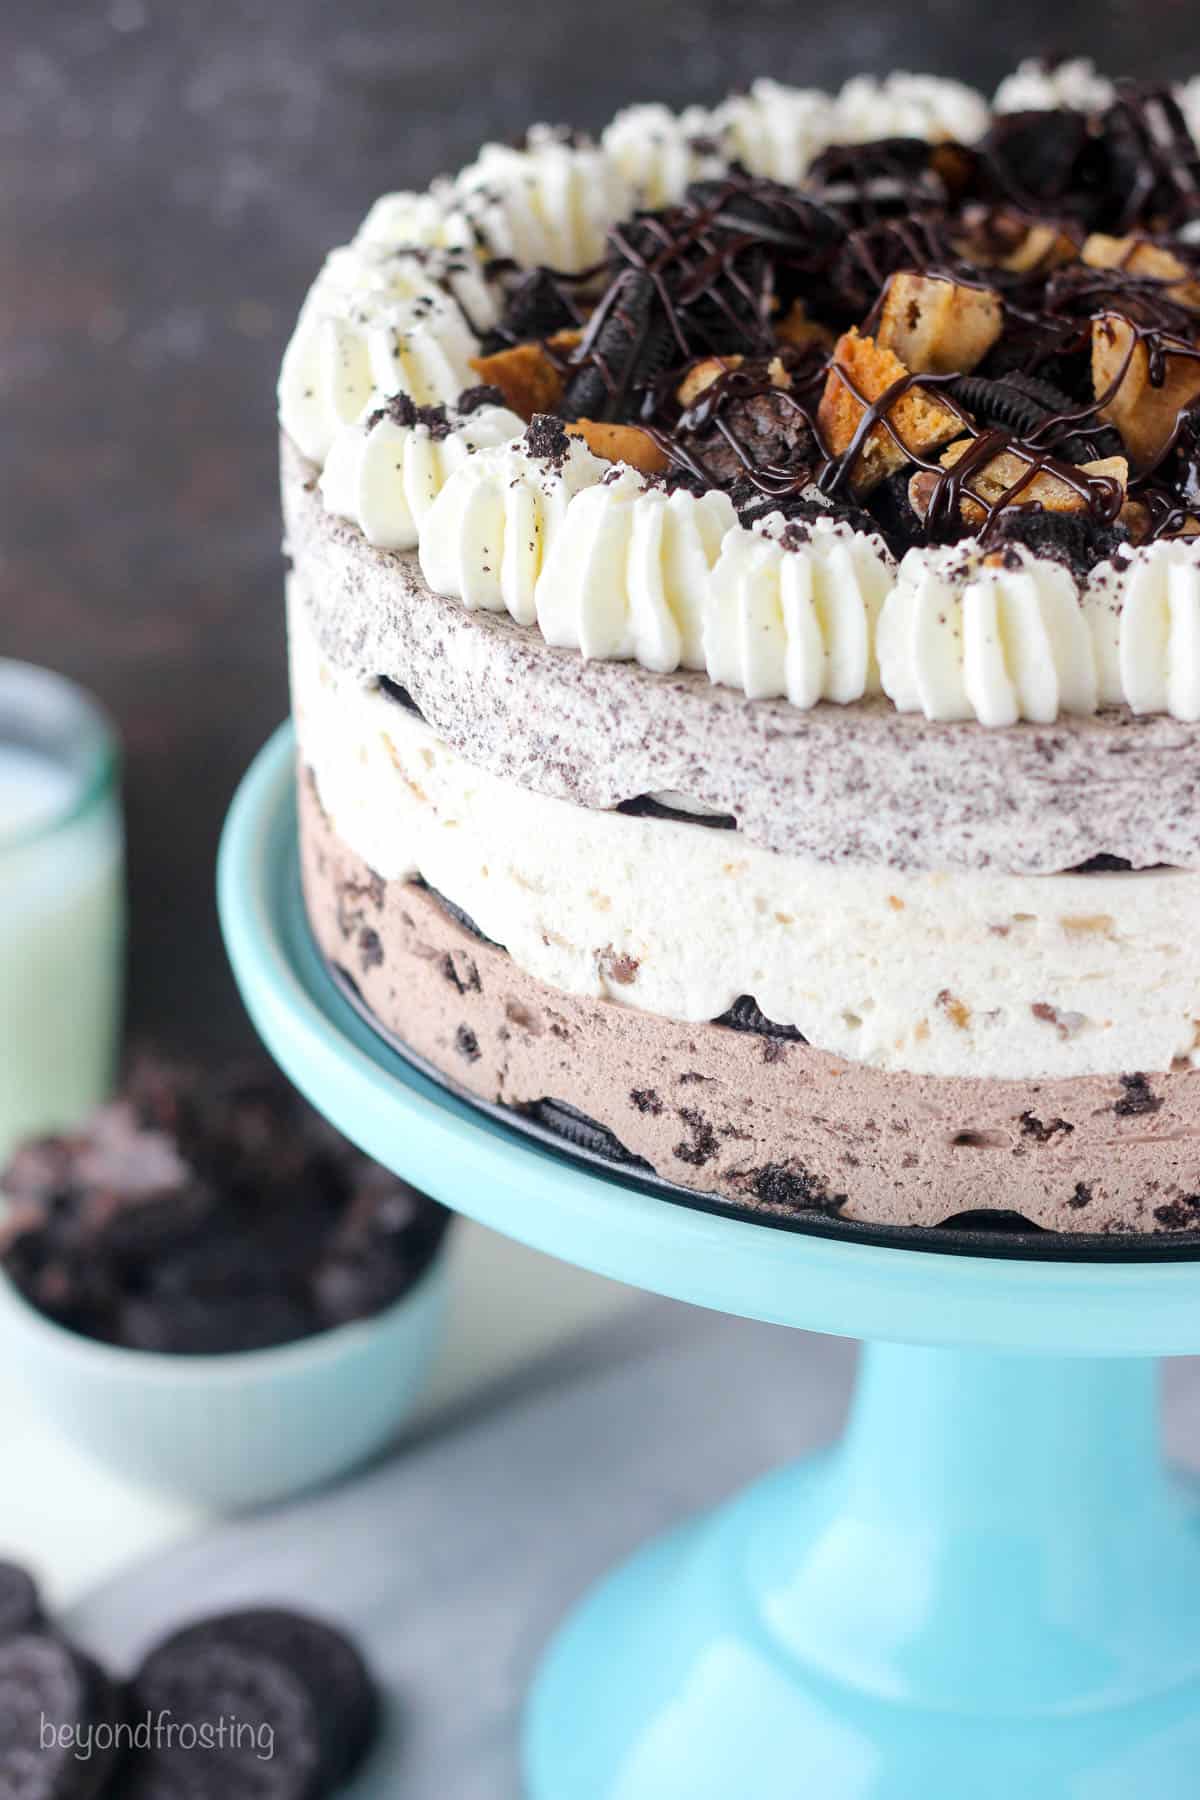 View of half an Oreo icebox cake on a plate cake stand